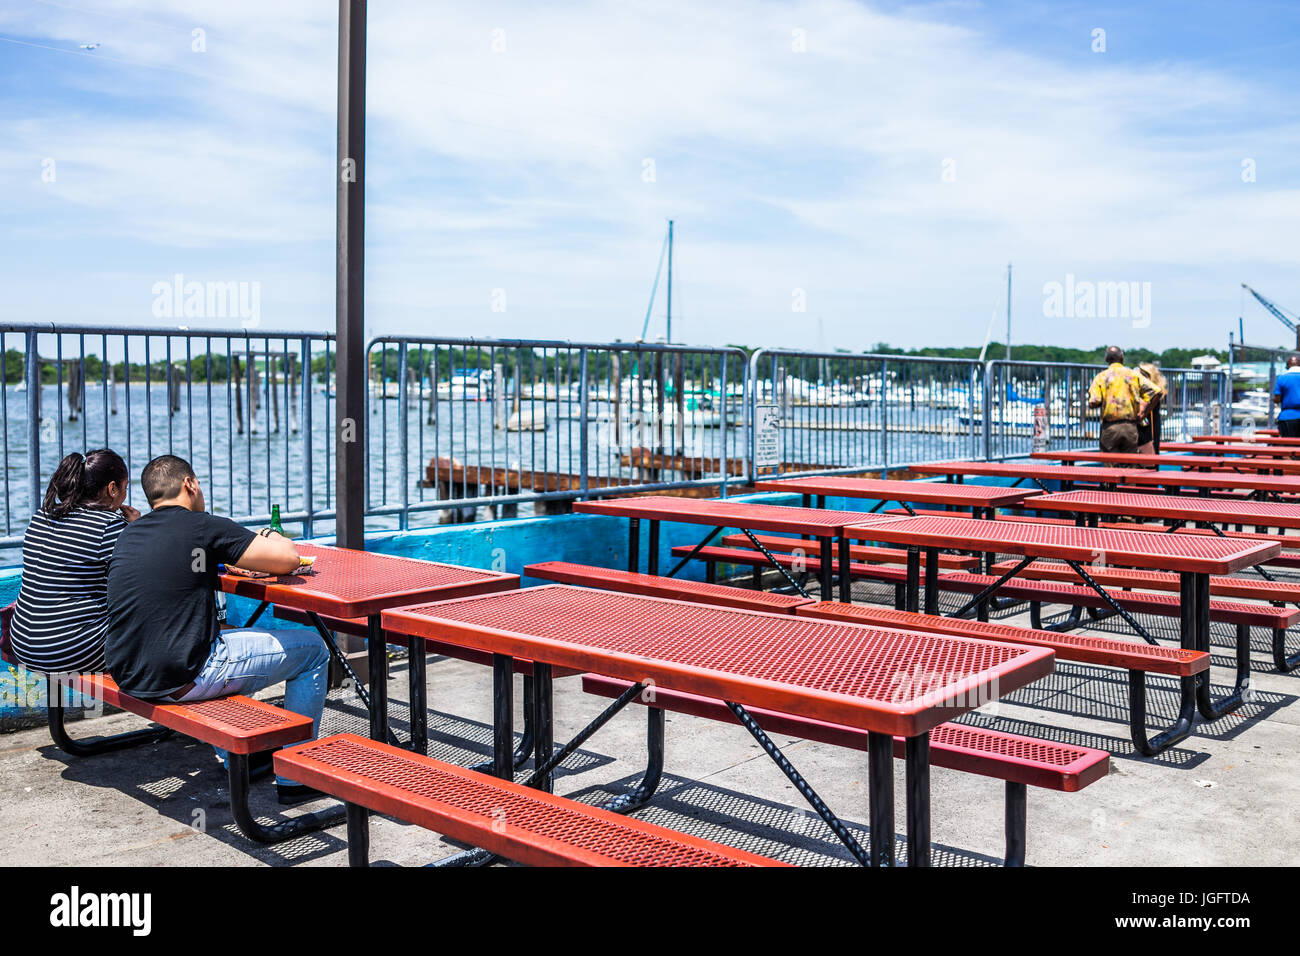 Bronx, USA - June 11, 2017: City Island harbor with boats and people eating lunch on picnic tables by restaurant Stock Photo